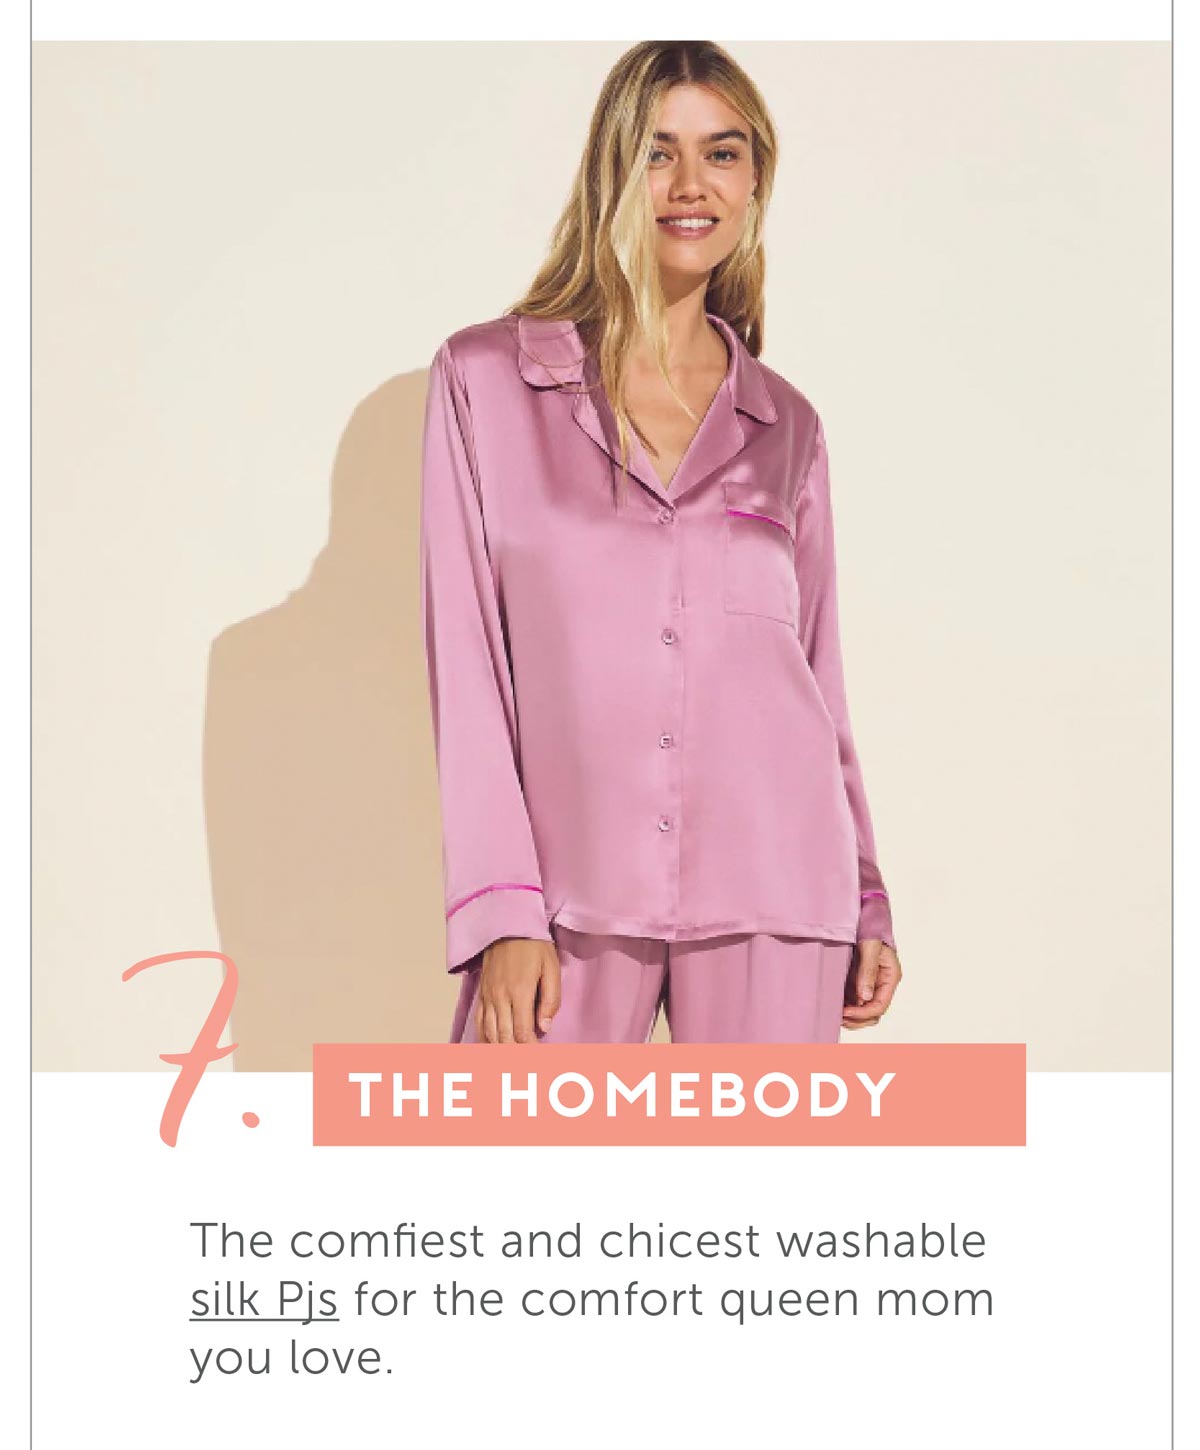 7. The Homebody. The comfiest and chicest washable silk Pjs for the comfort queen mom you love.